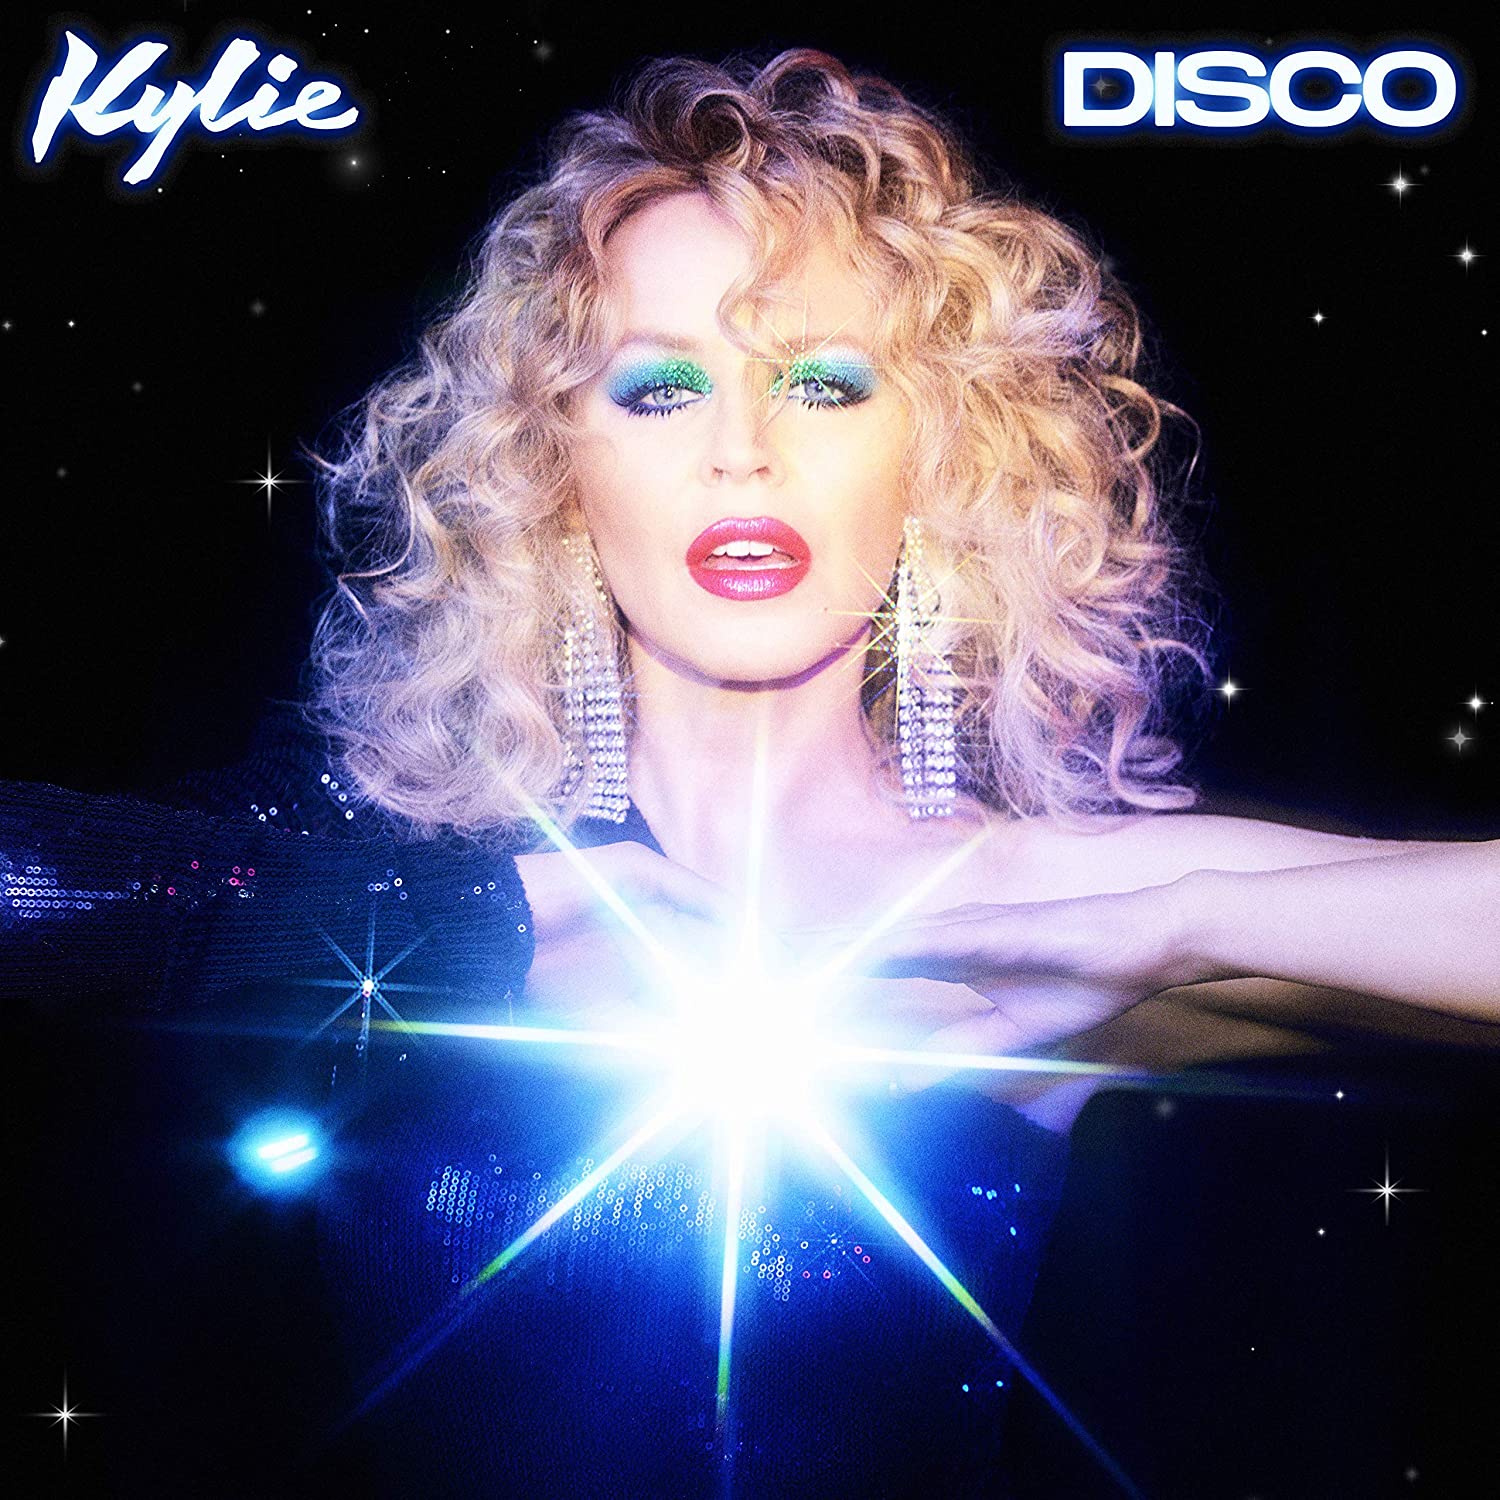 Hand Signed KYLIE MINOGUE 12” X 8” Disco Photo Print ⚡️Sold Out ⚡️Ship World 